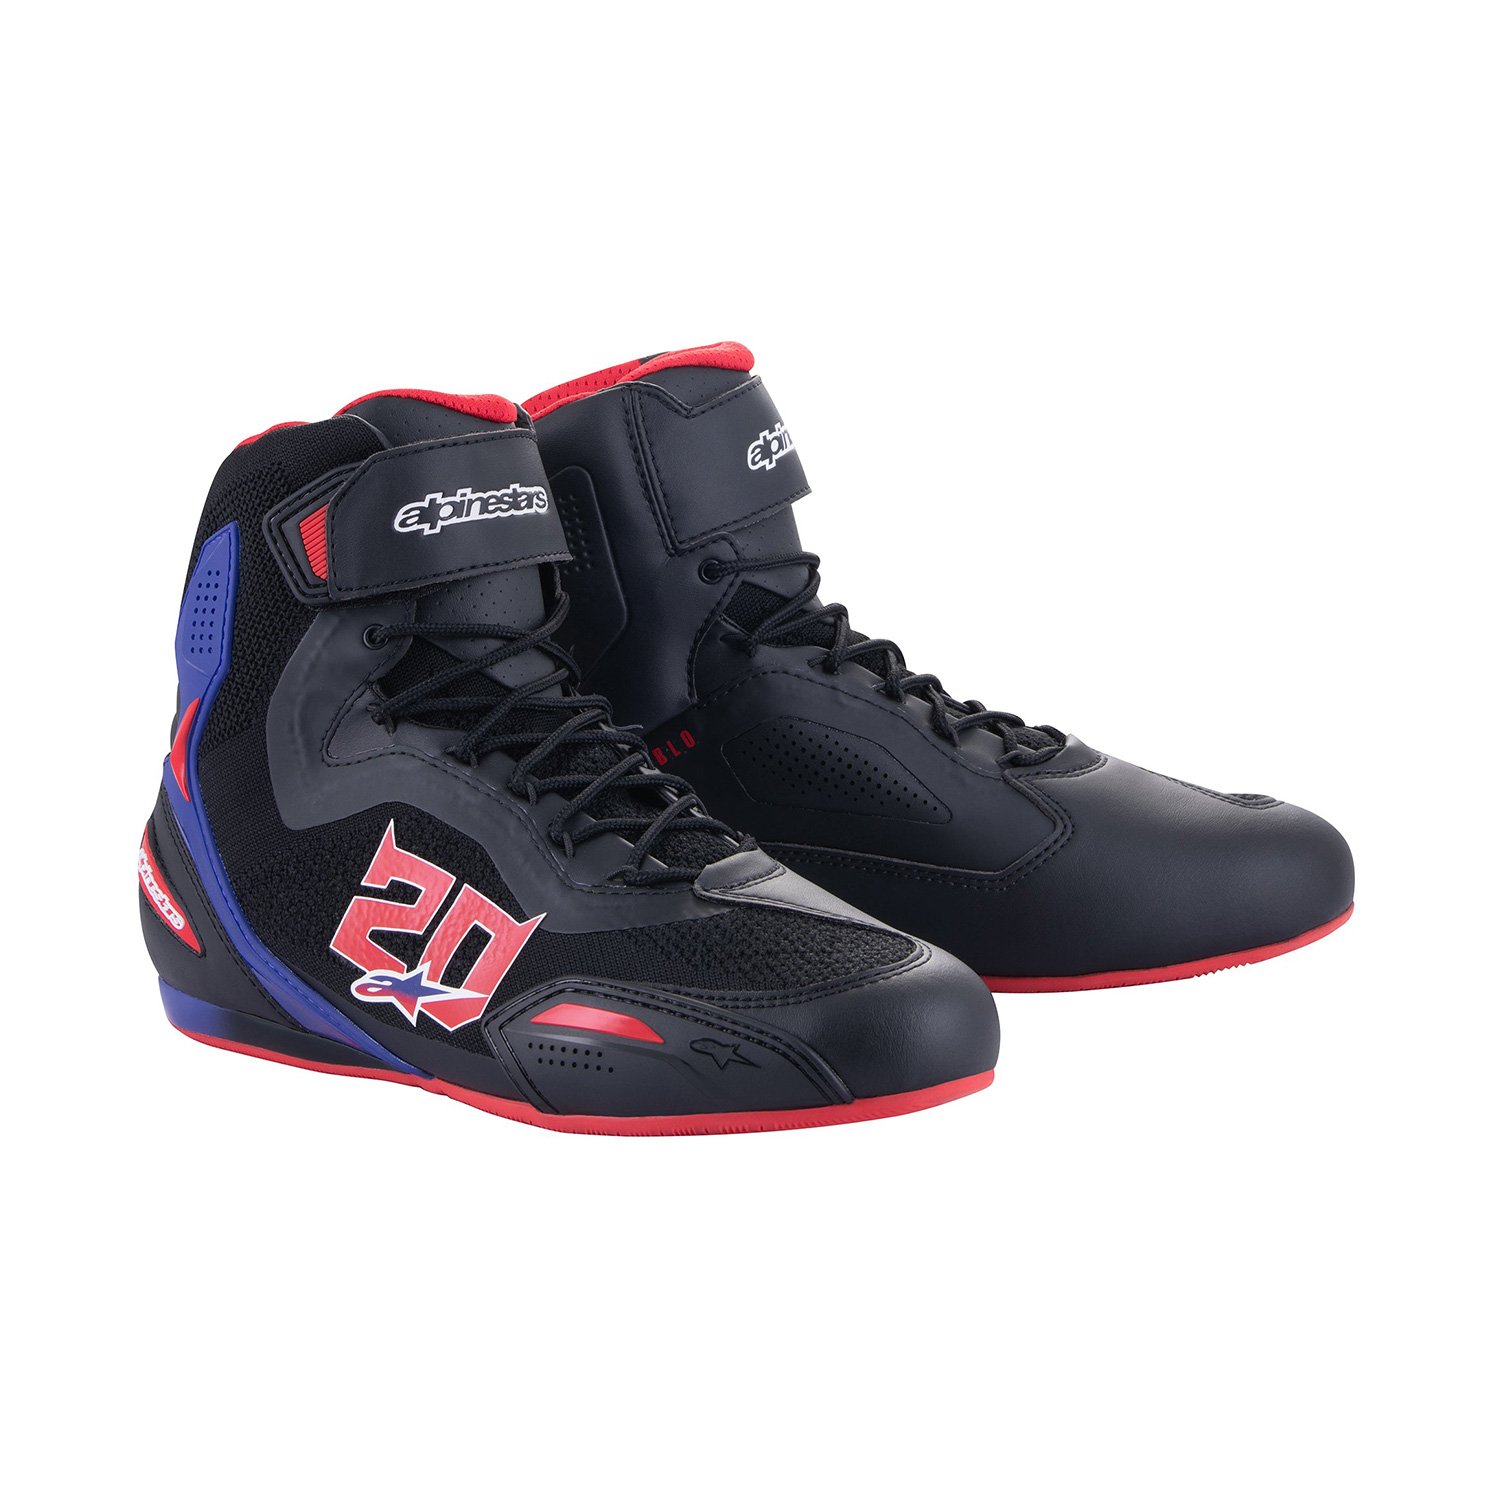 Image of Alpinestars FQ20 Faster-3 Rideknit Noir Bright Rouge Bleu Chaussures Taille US 14